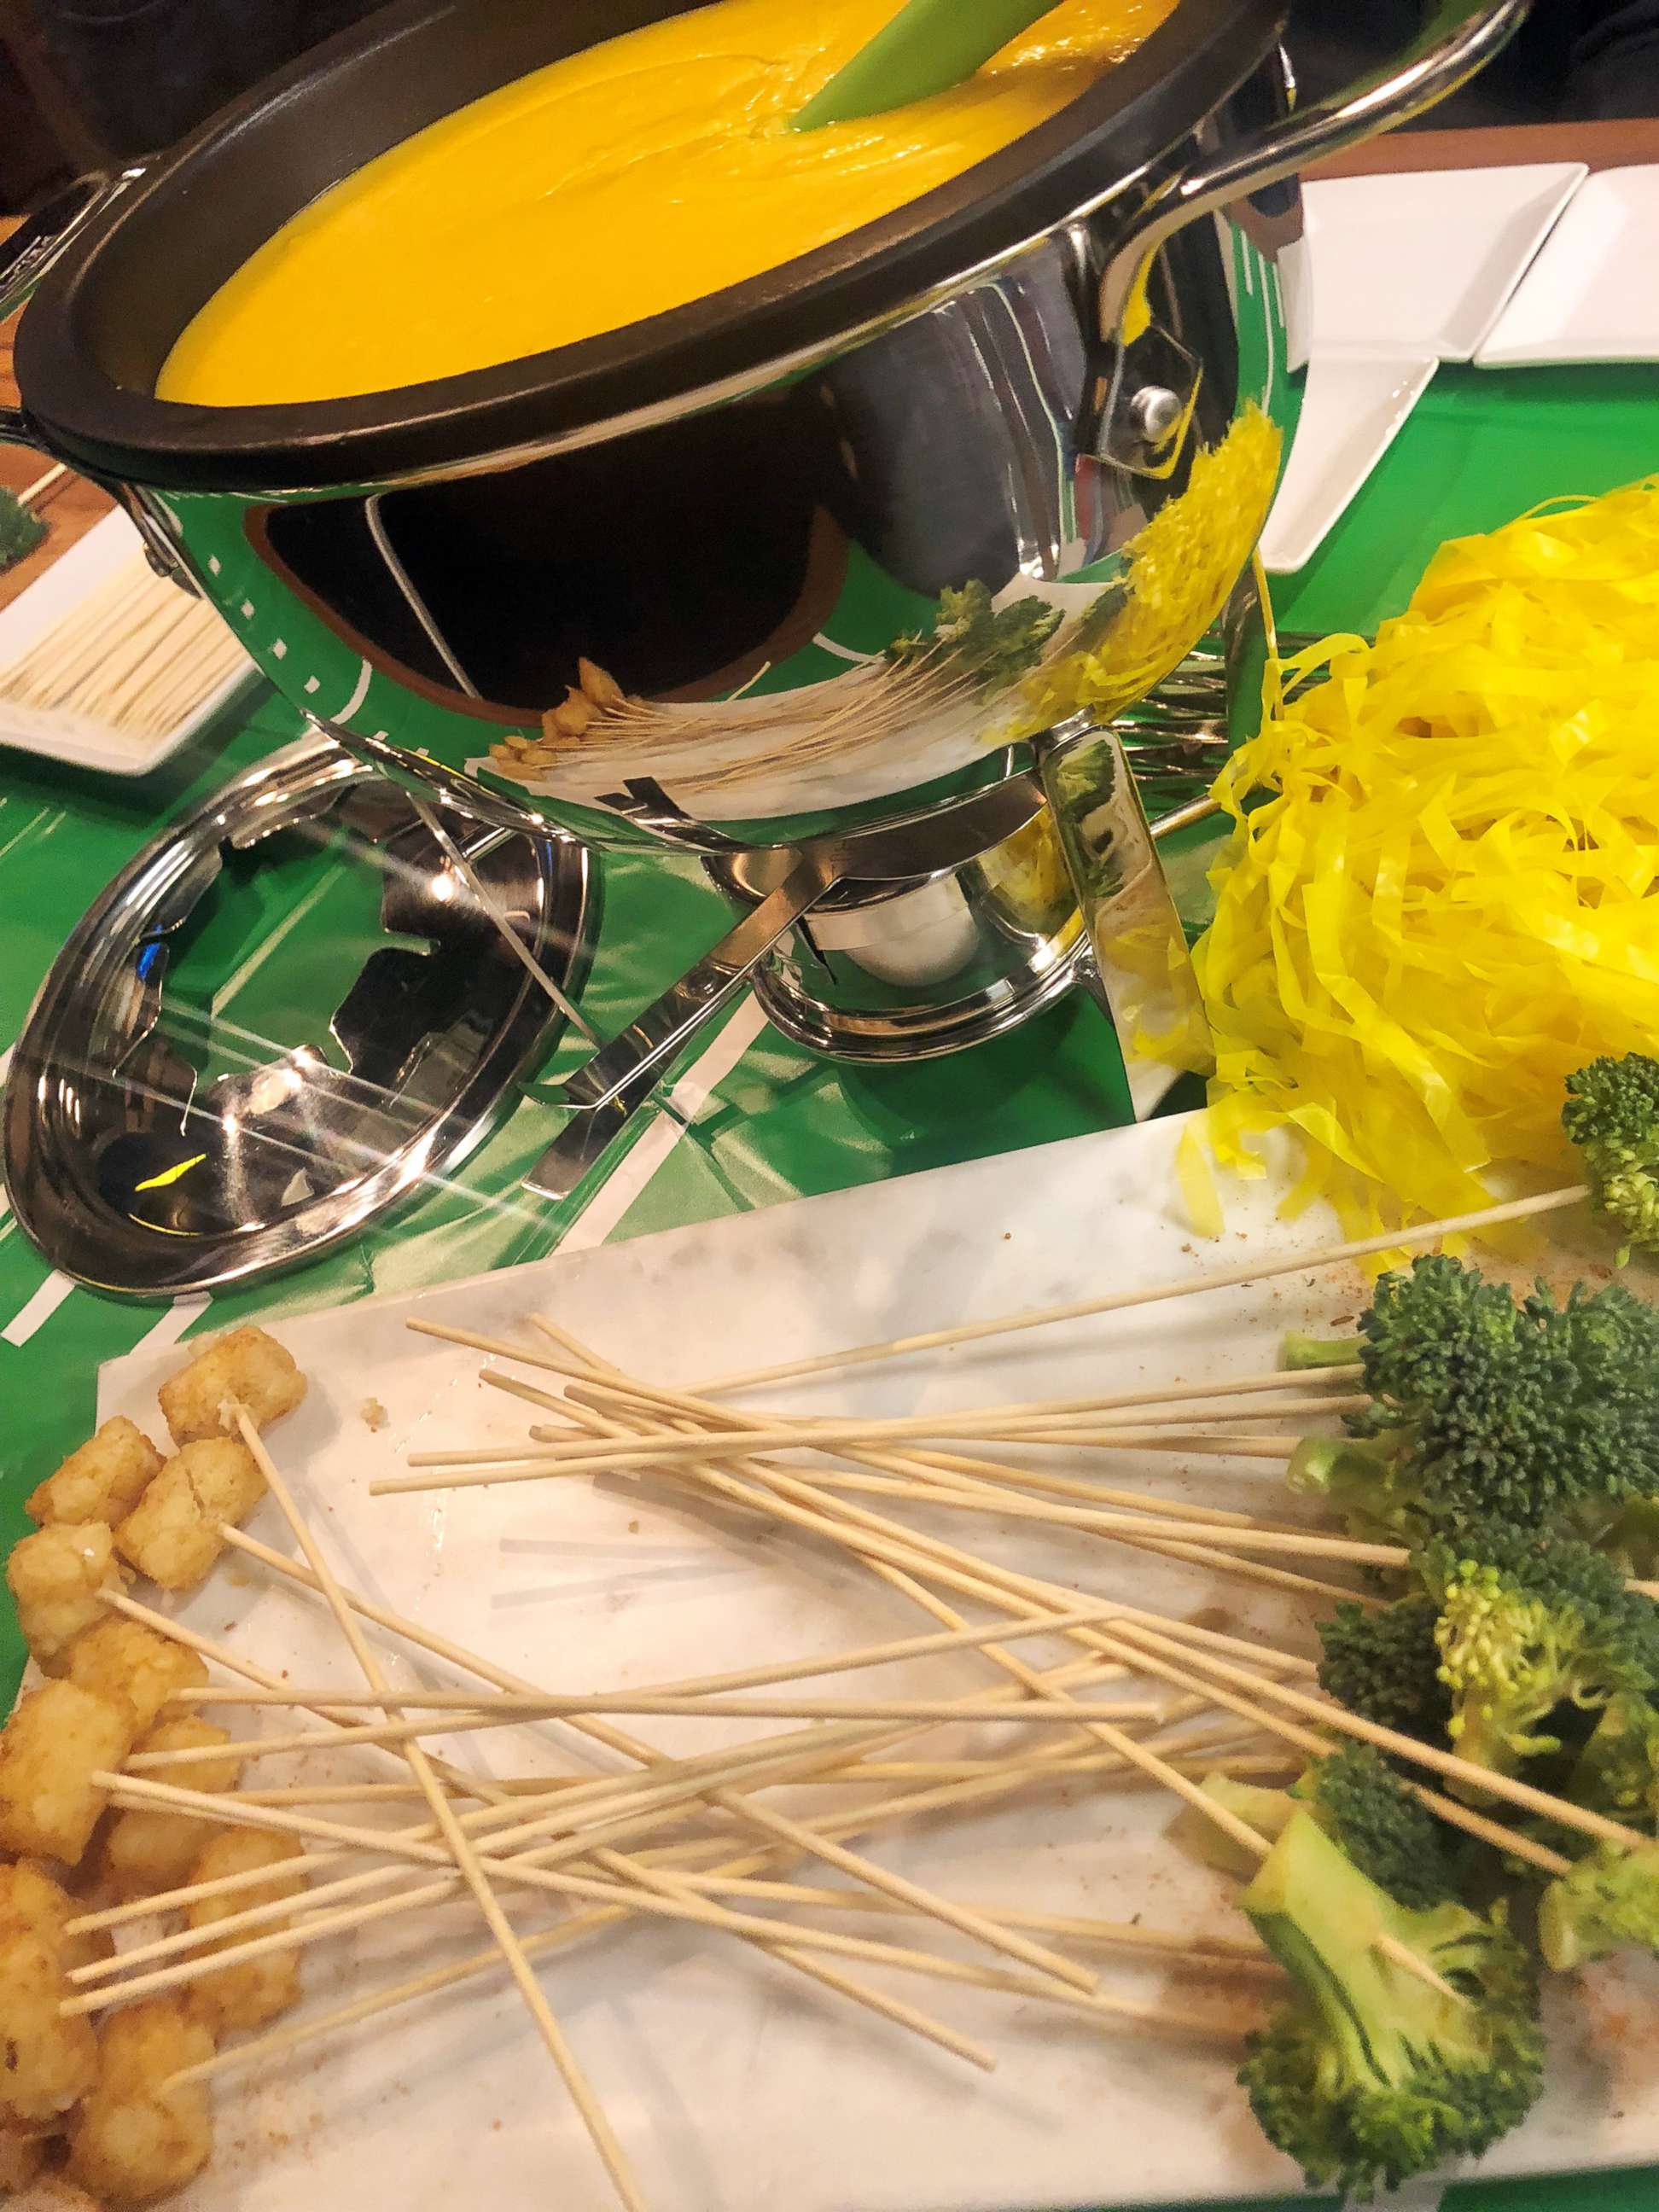 PHOTO: Cheddar cheese fondue from chef Gina Neely.